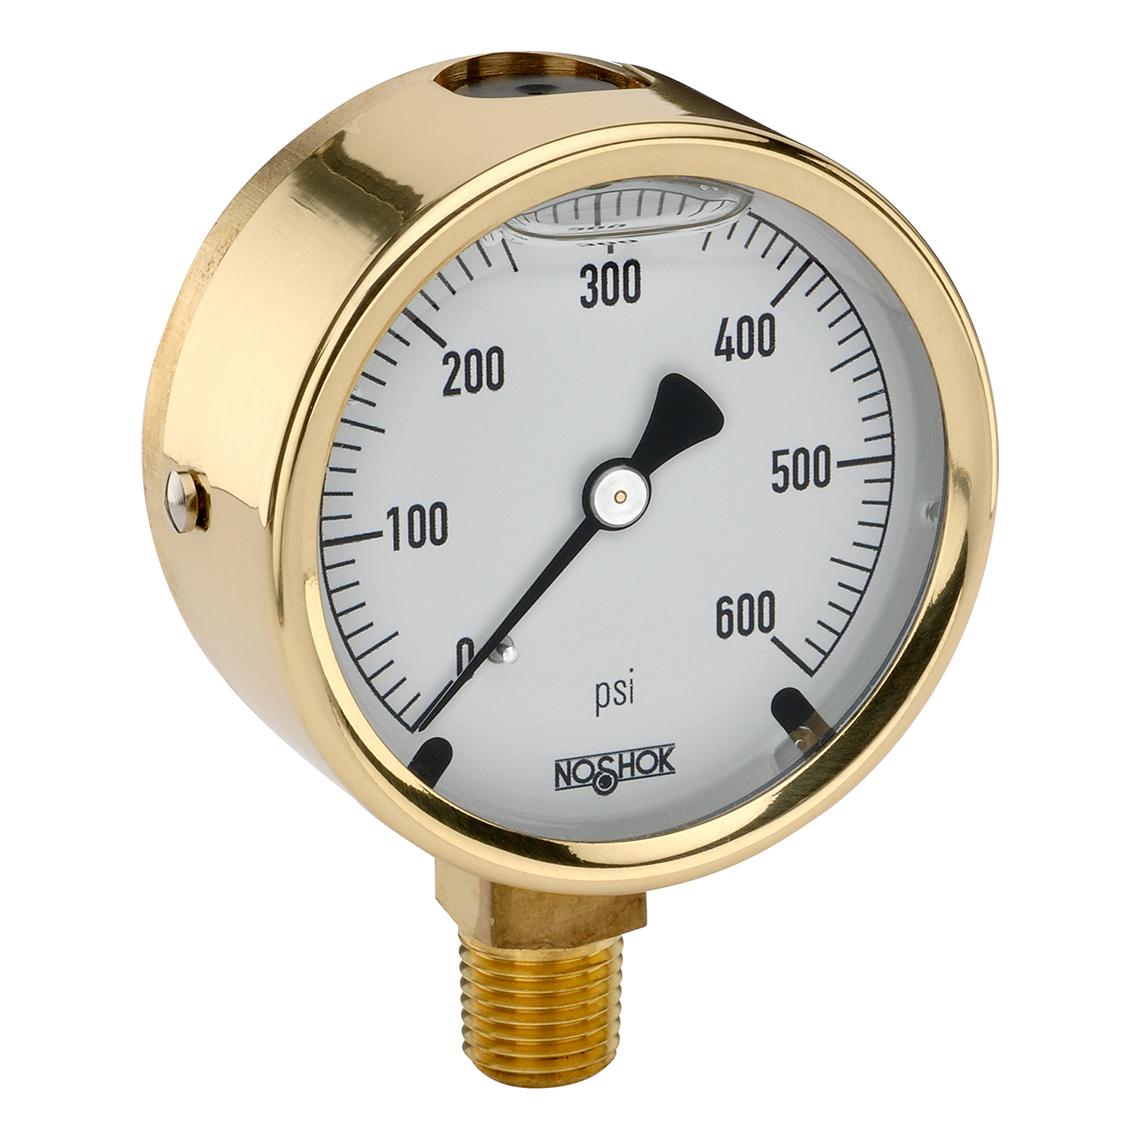 Noshok 25-300-300-PSI 2-1/2'' Brass Case, Copper Alloy Internals, 300 psi, 1/4'' National Pipe Thread (NPT) Male Bottom Connection Pressure Gauge with Glycerin Filled